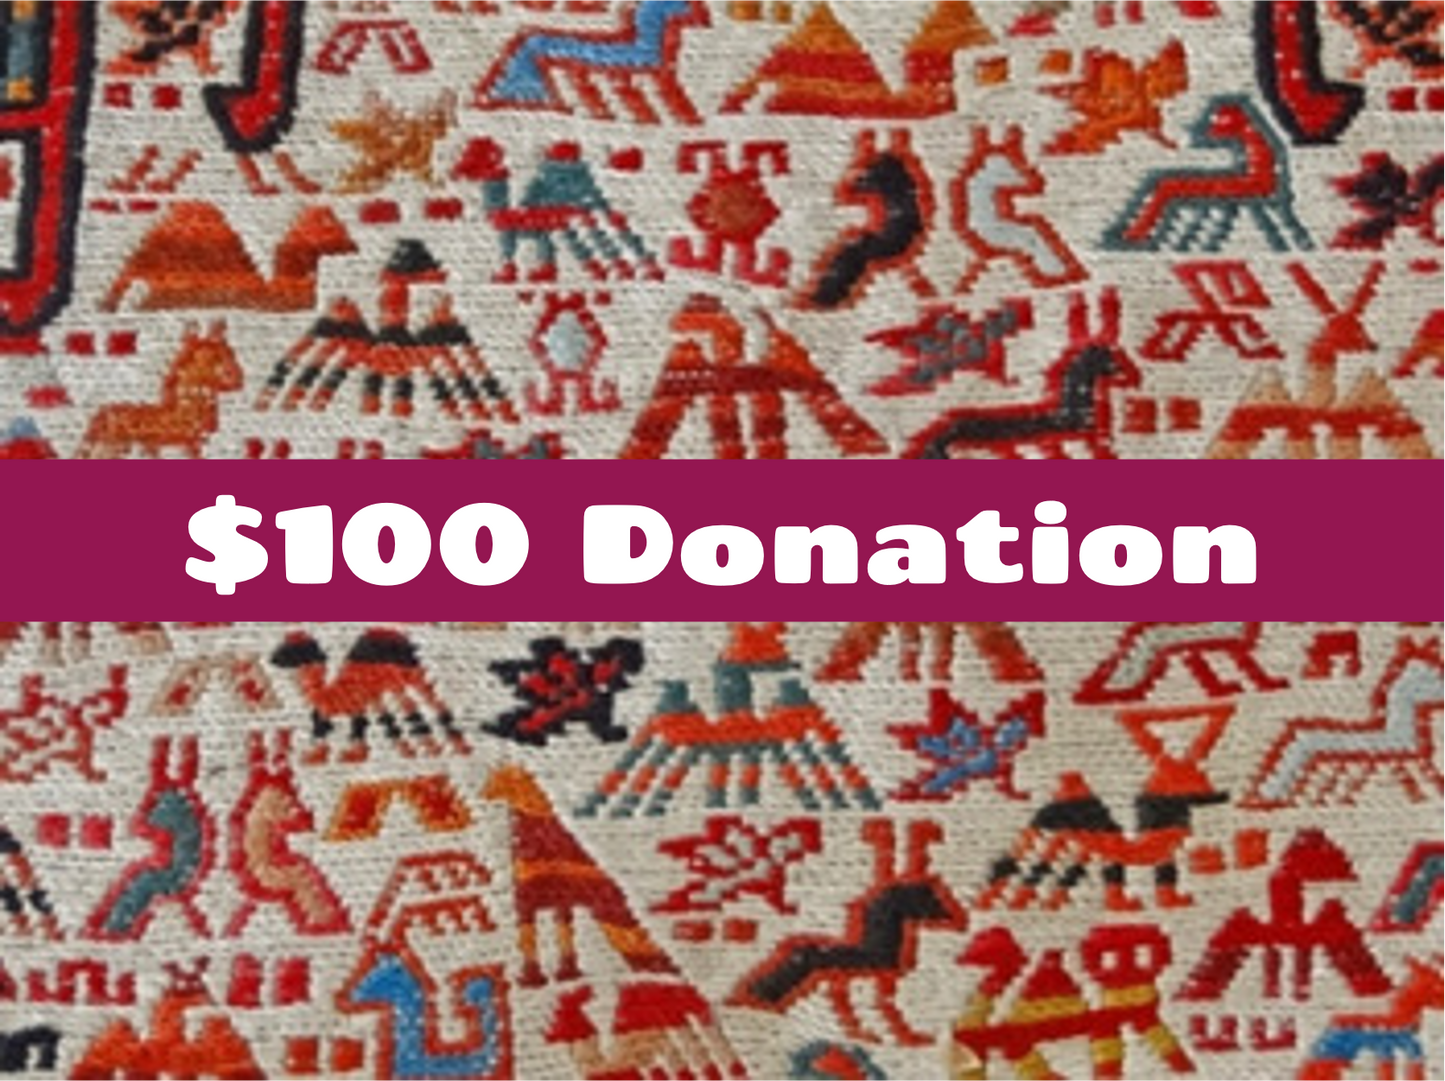 Support $100